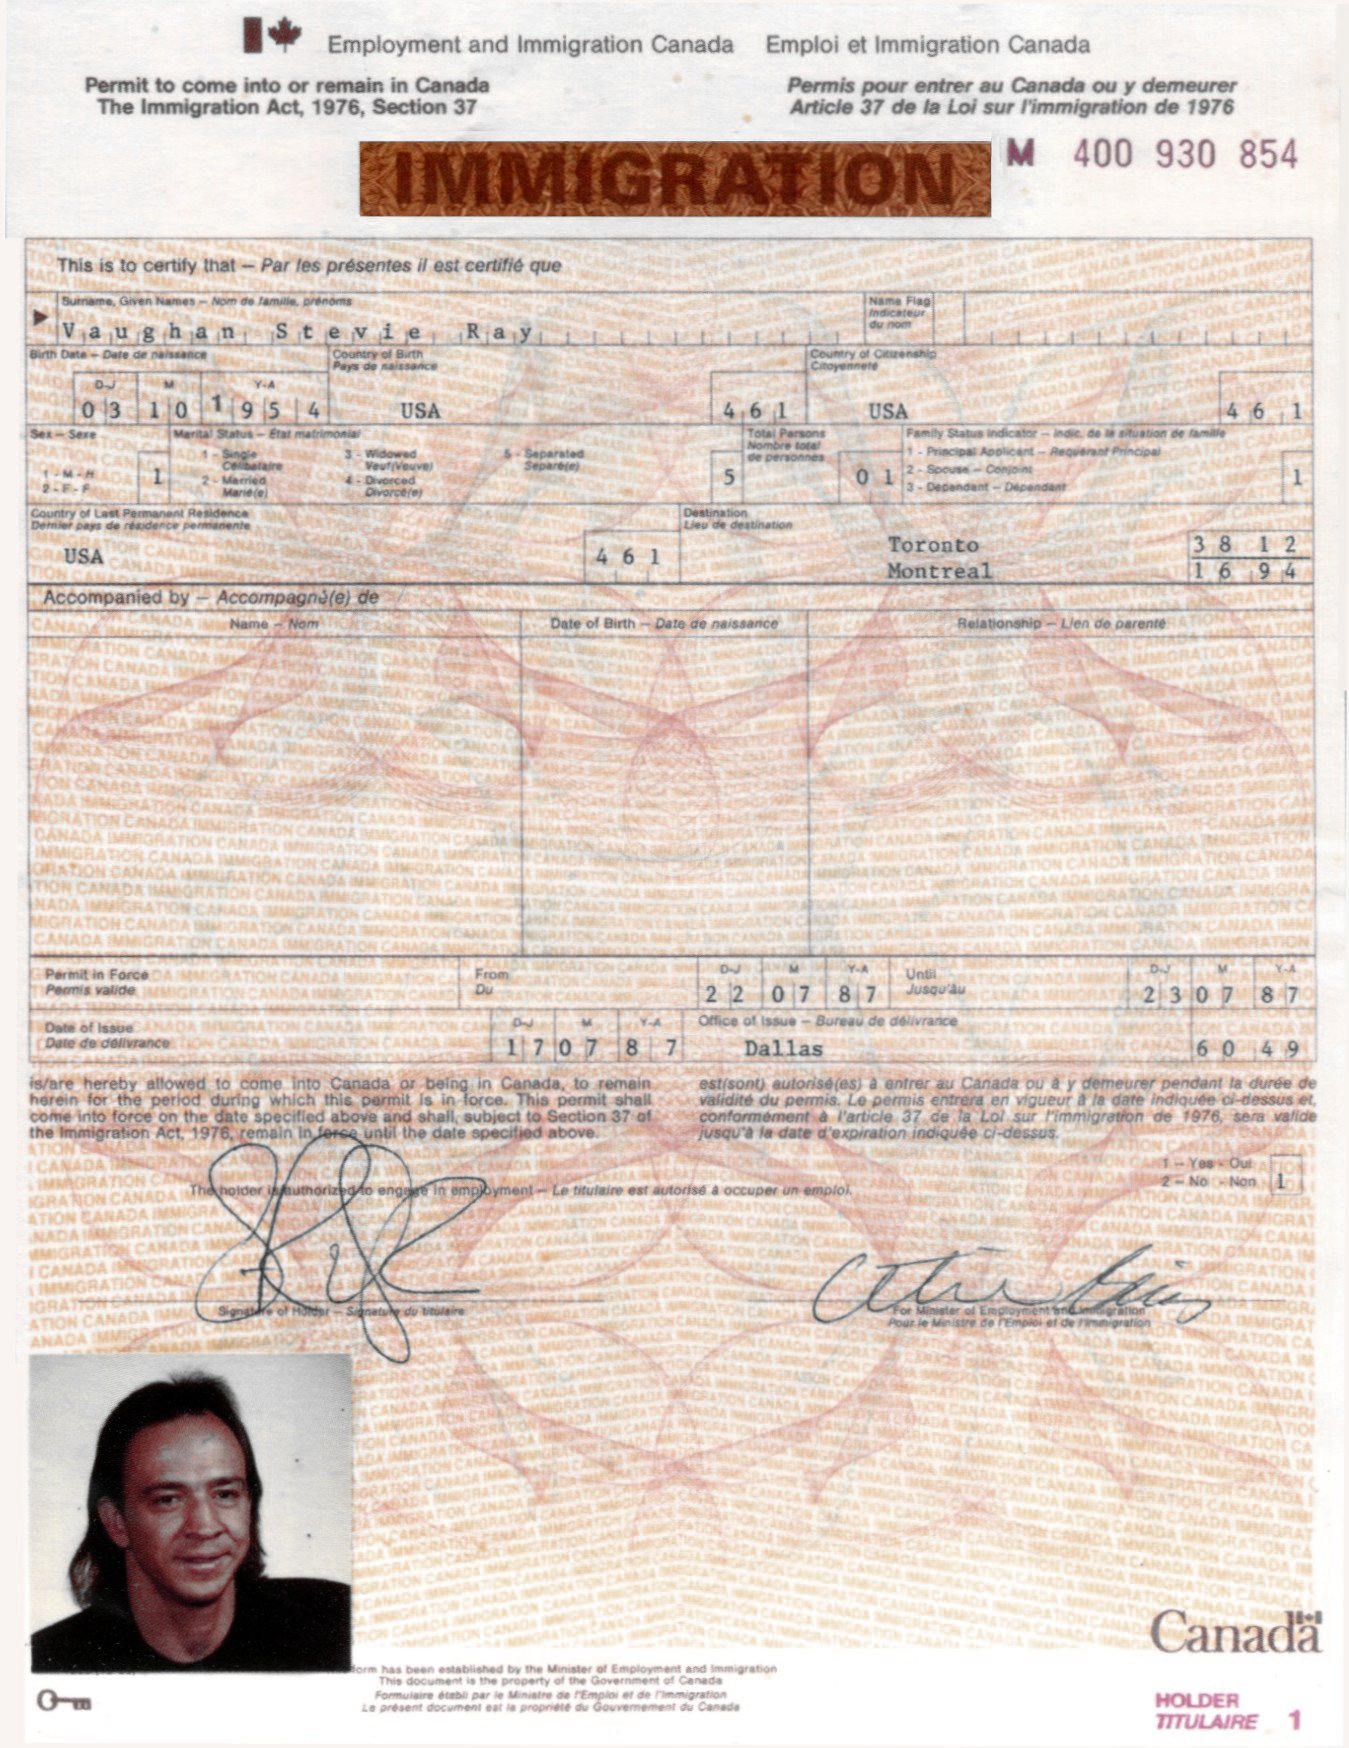 Stevie Ray Vaughan Certificate of Immigration